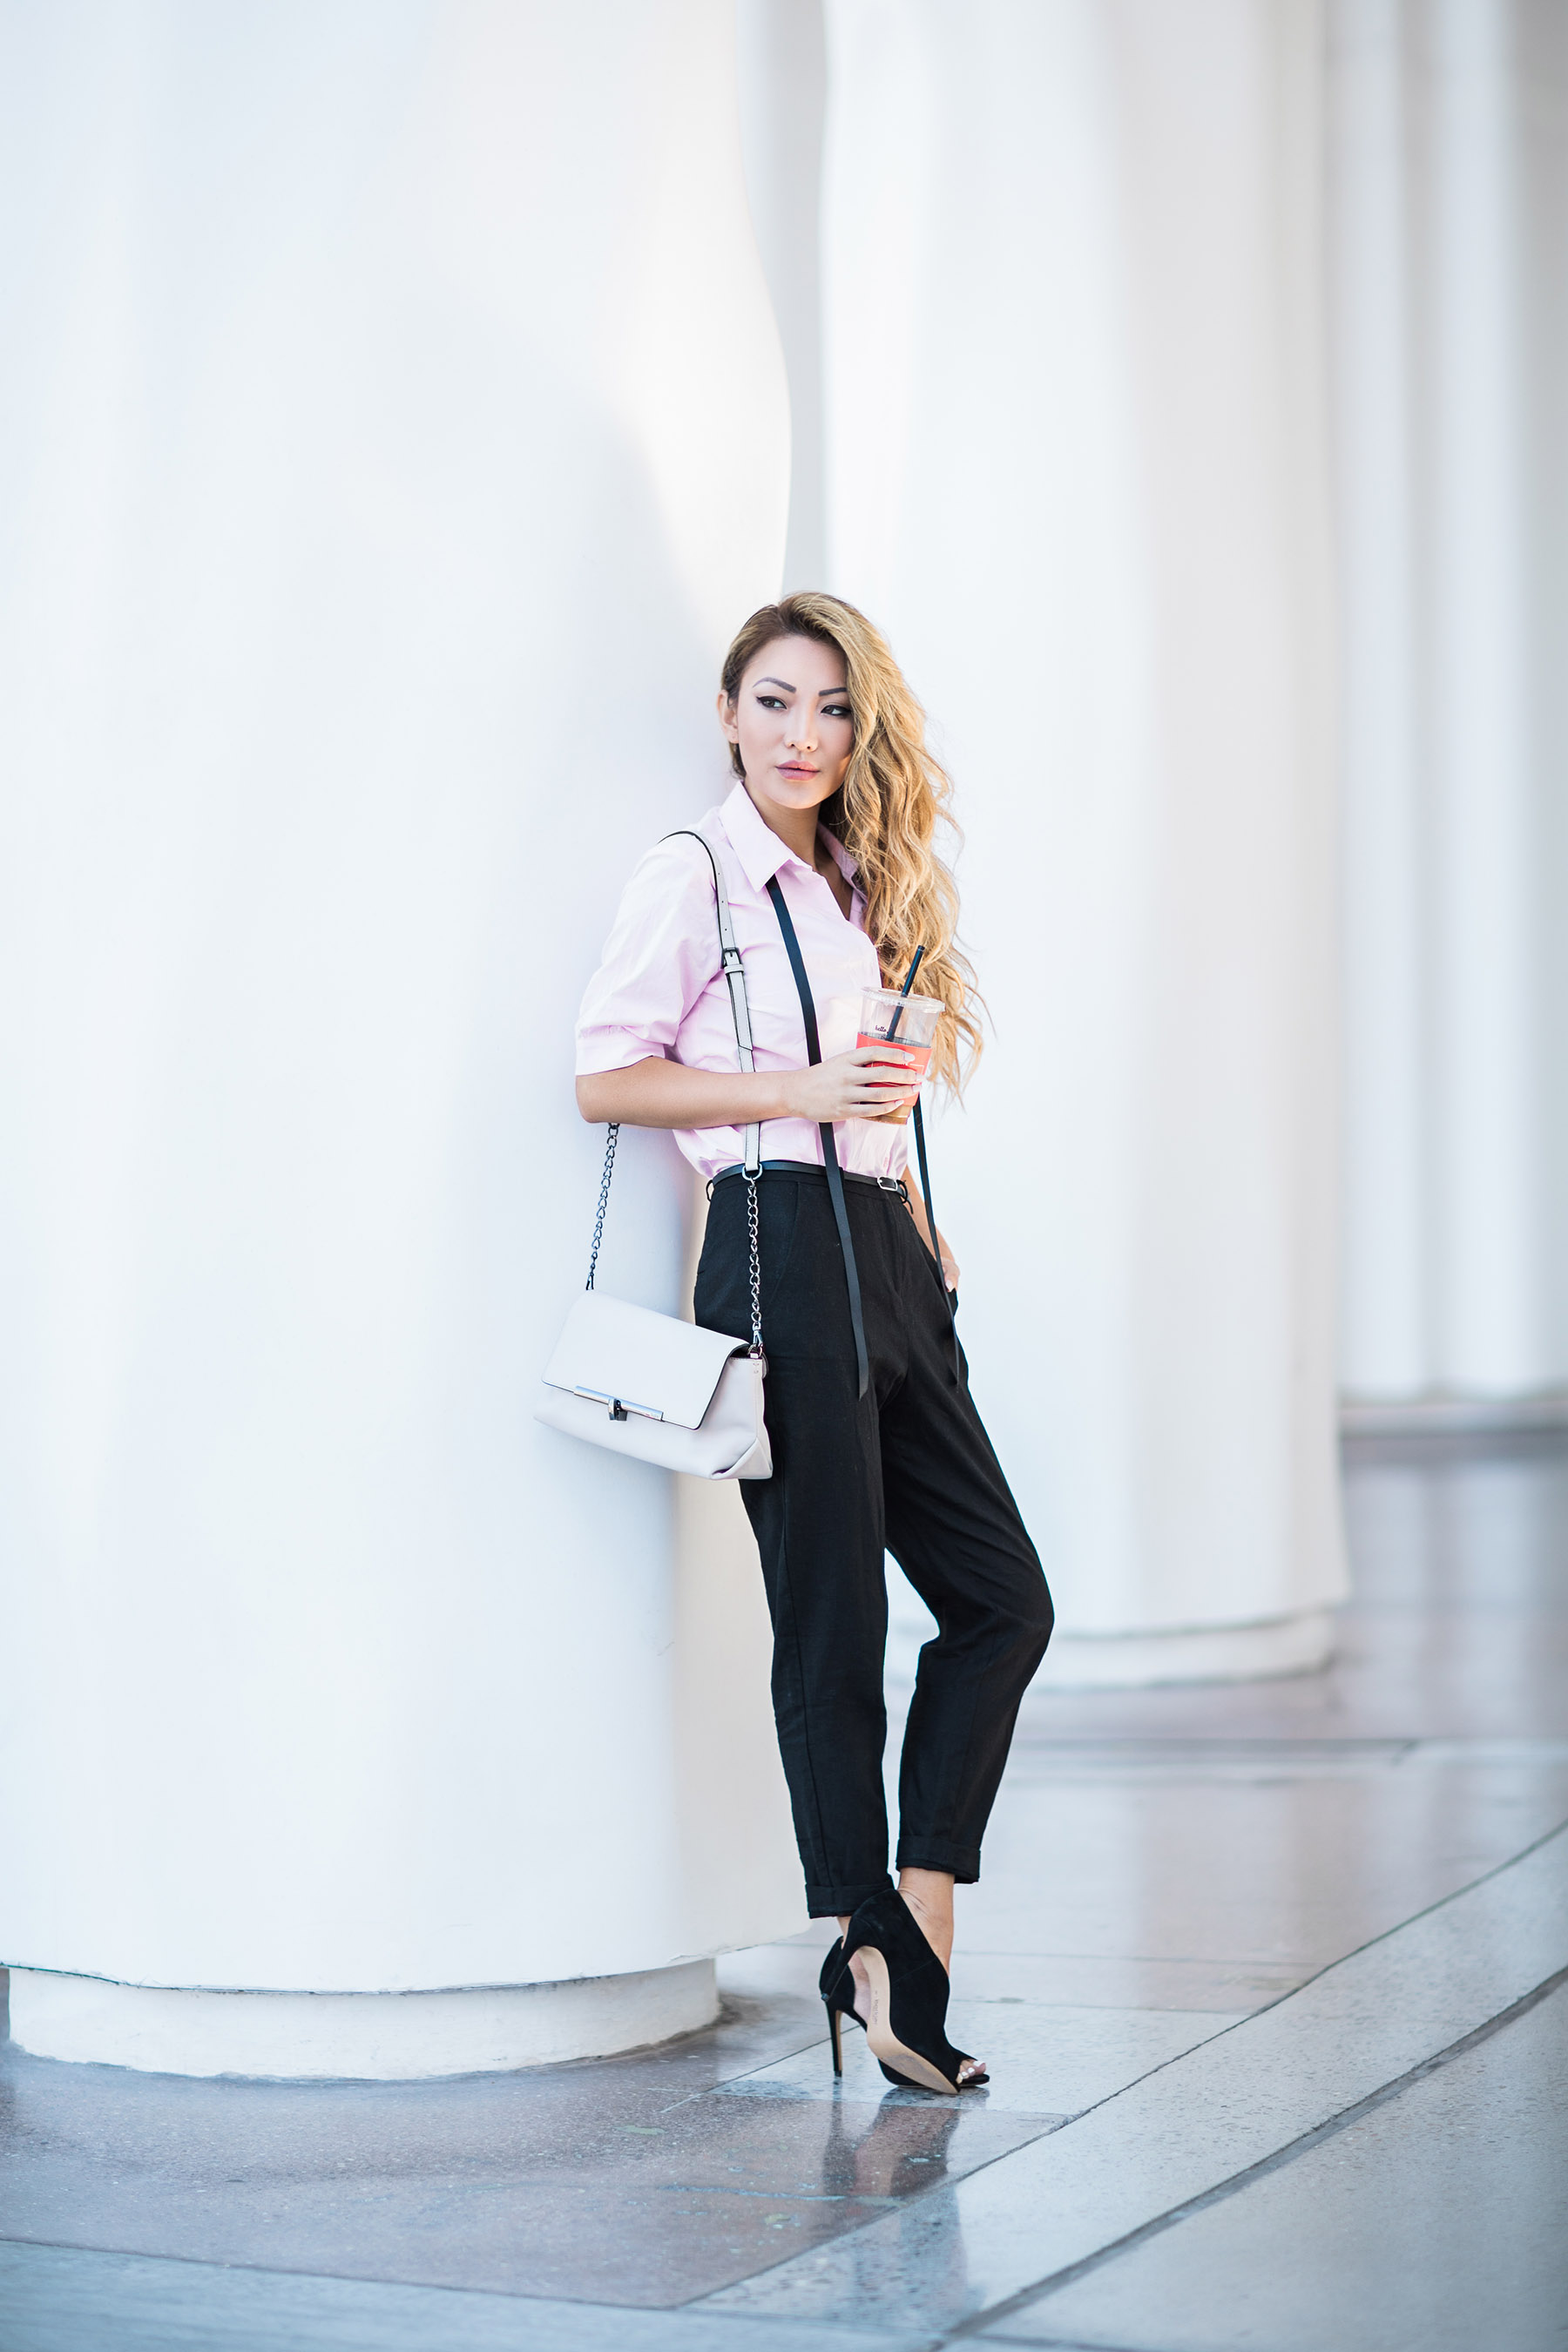 7 Pieces to Spice Up Your Work Outfit // NotJessFashion